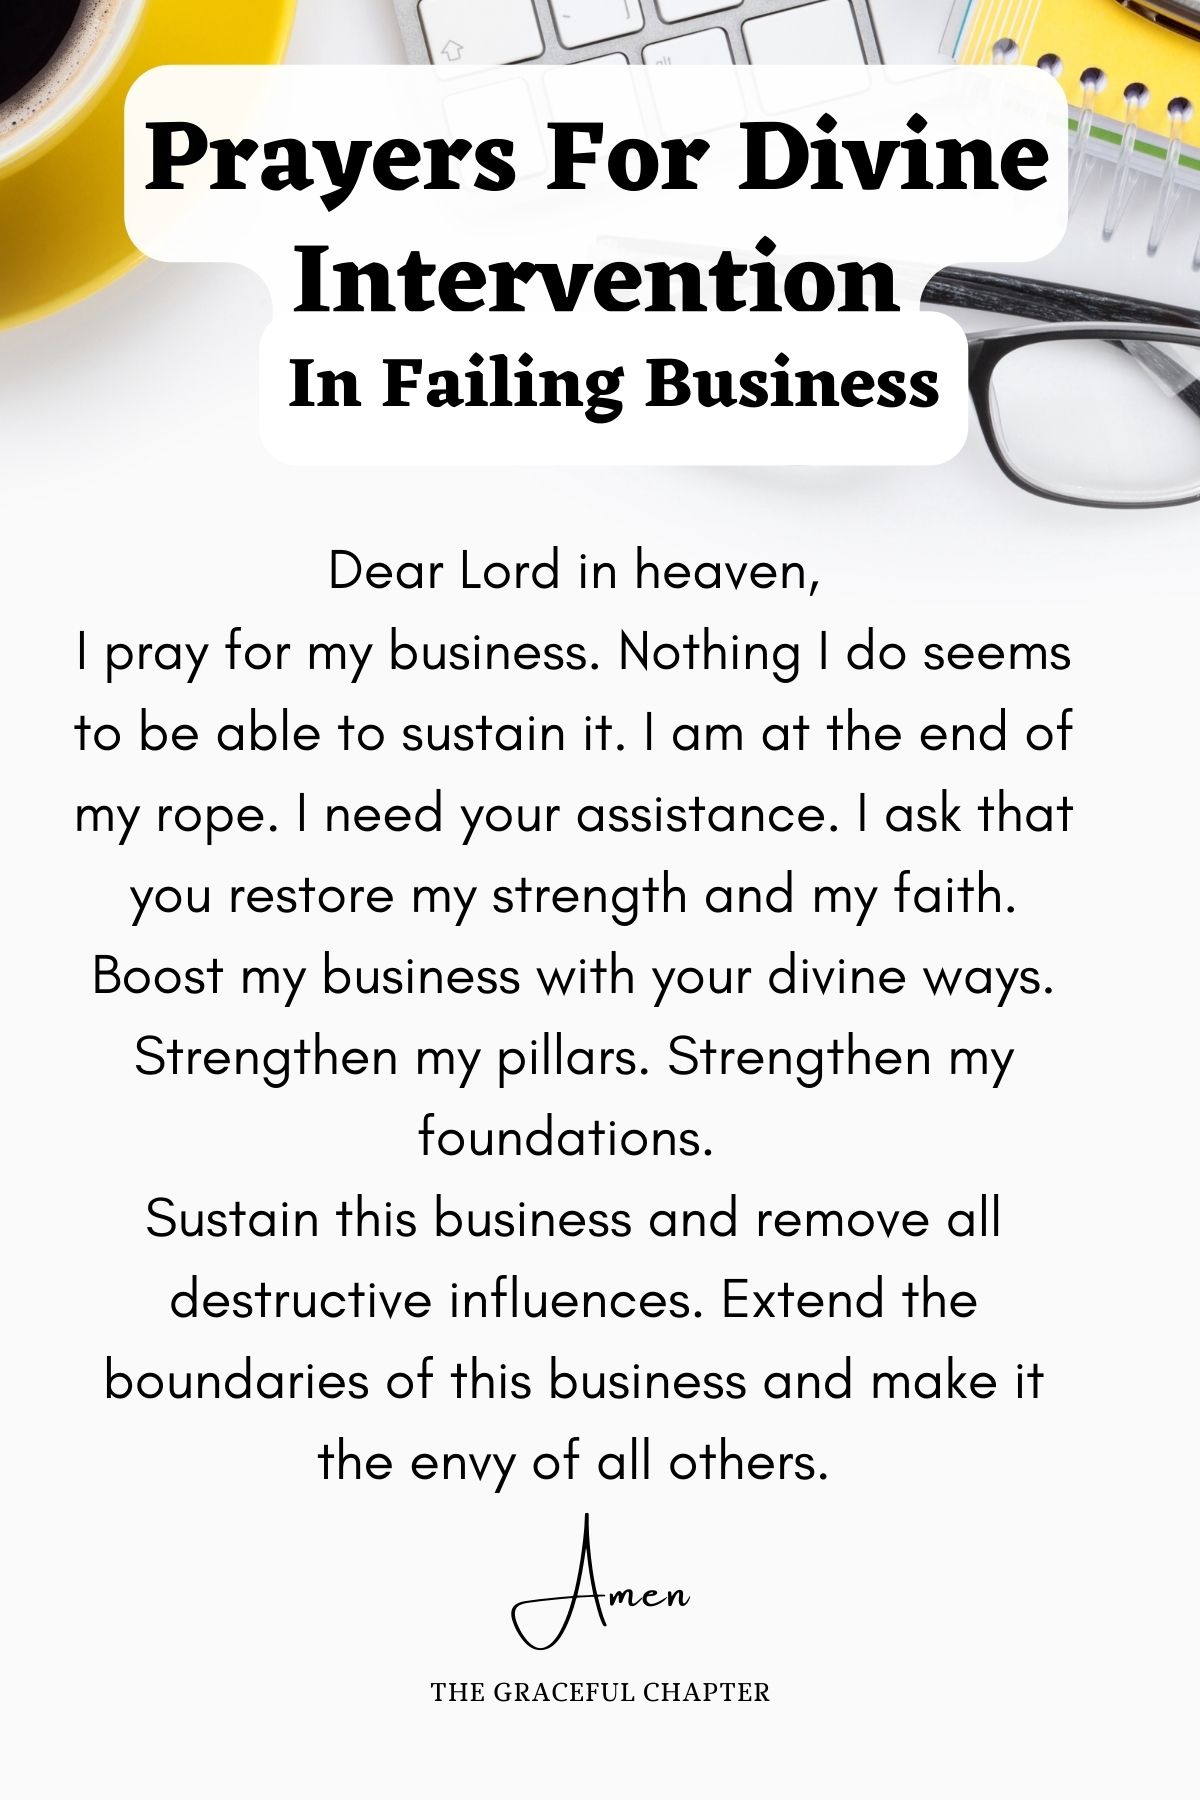 Prayer for divine intervention In failing business